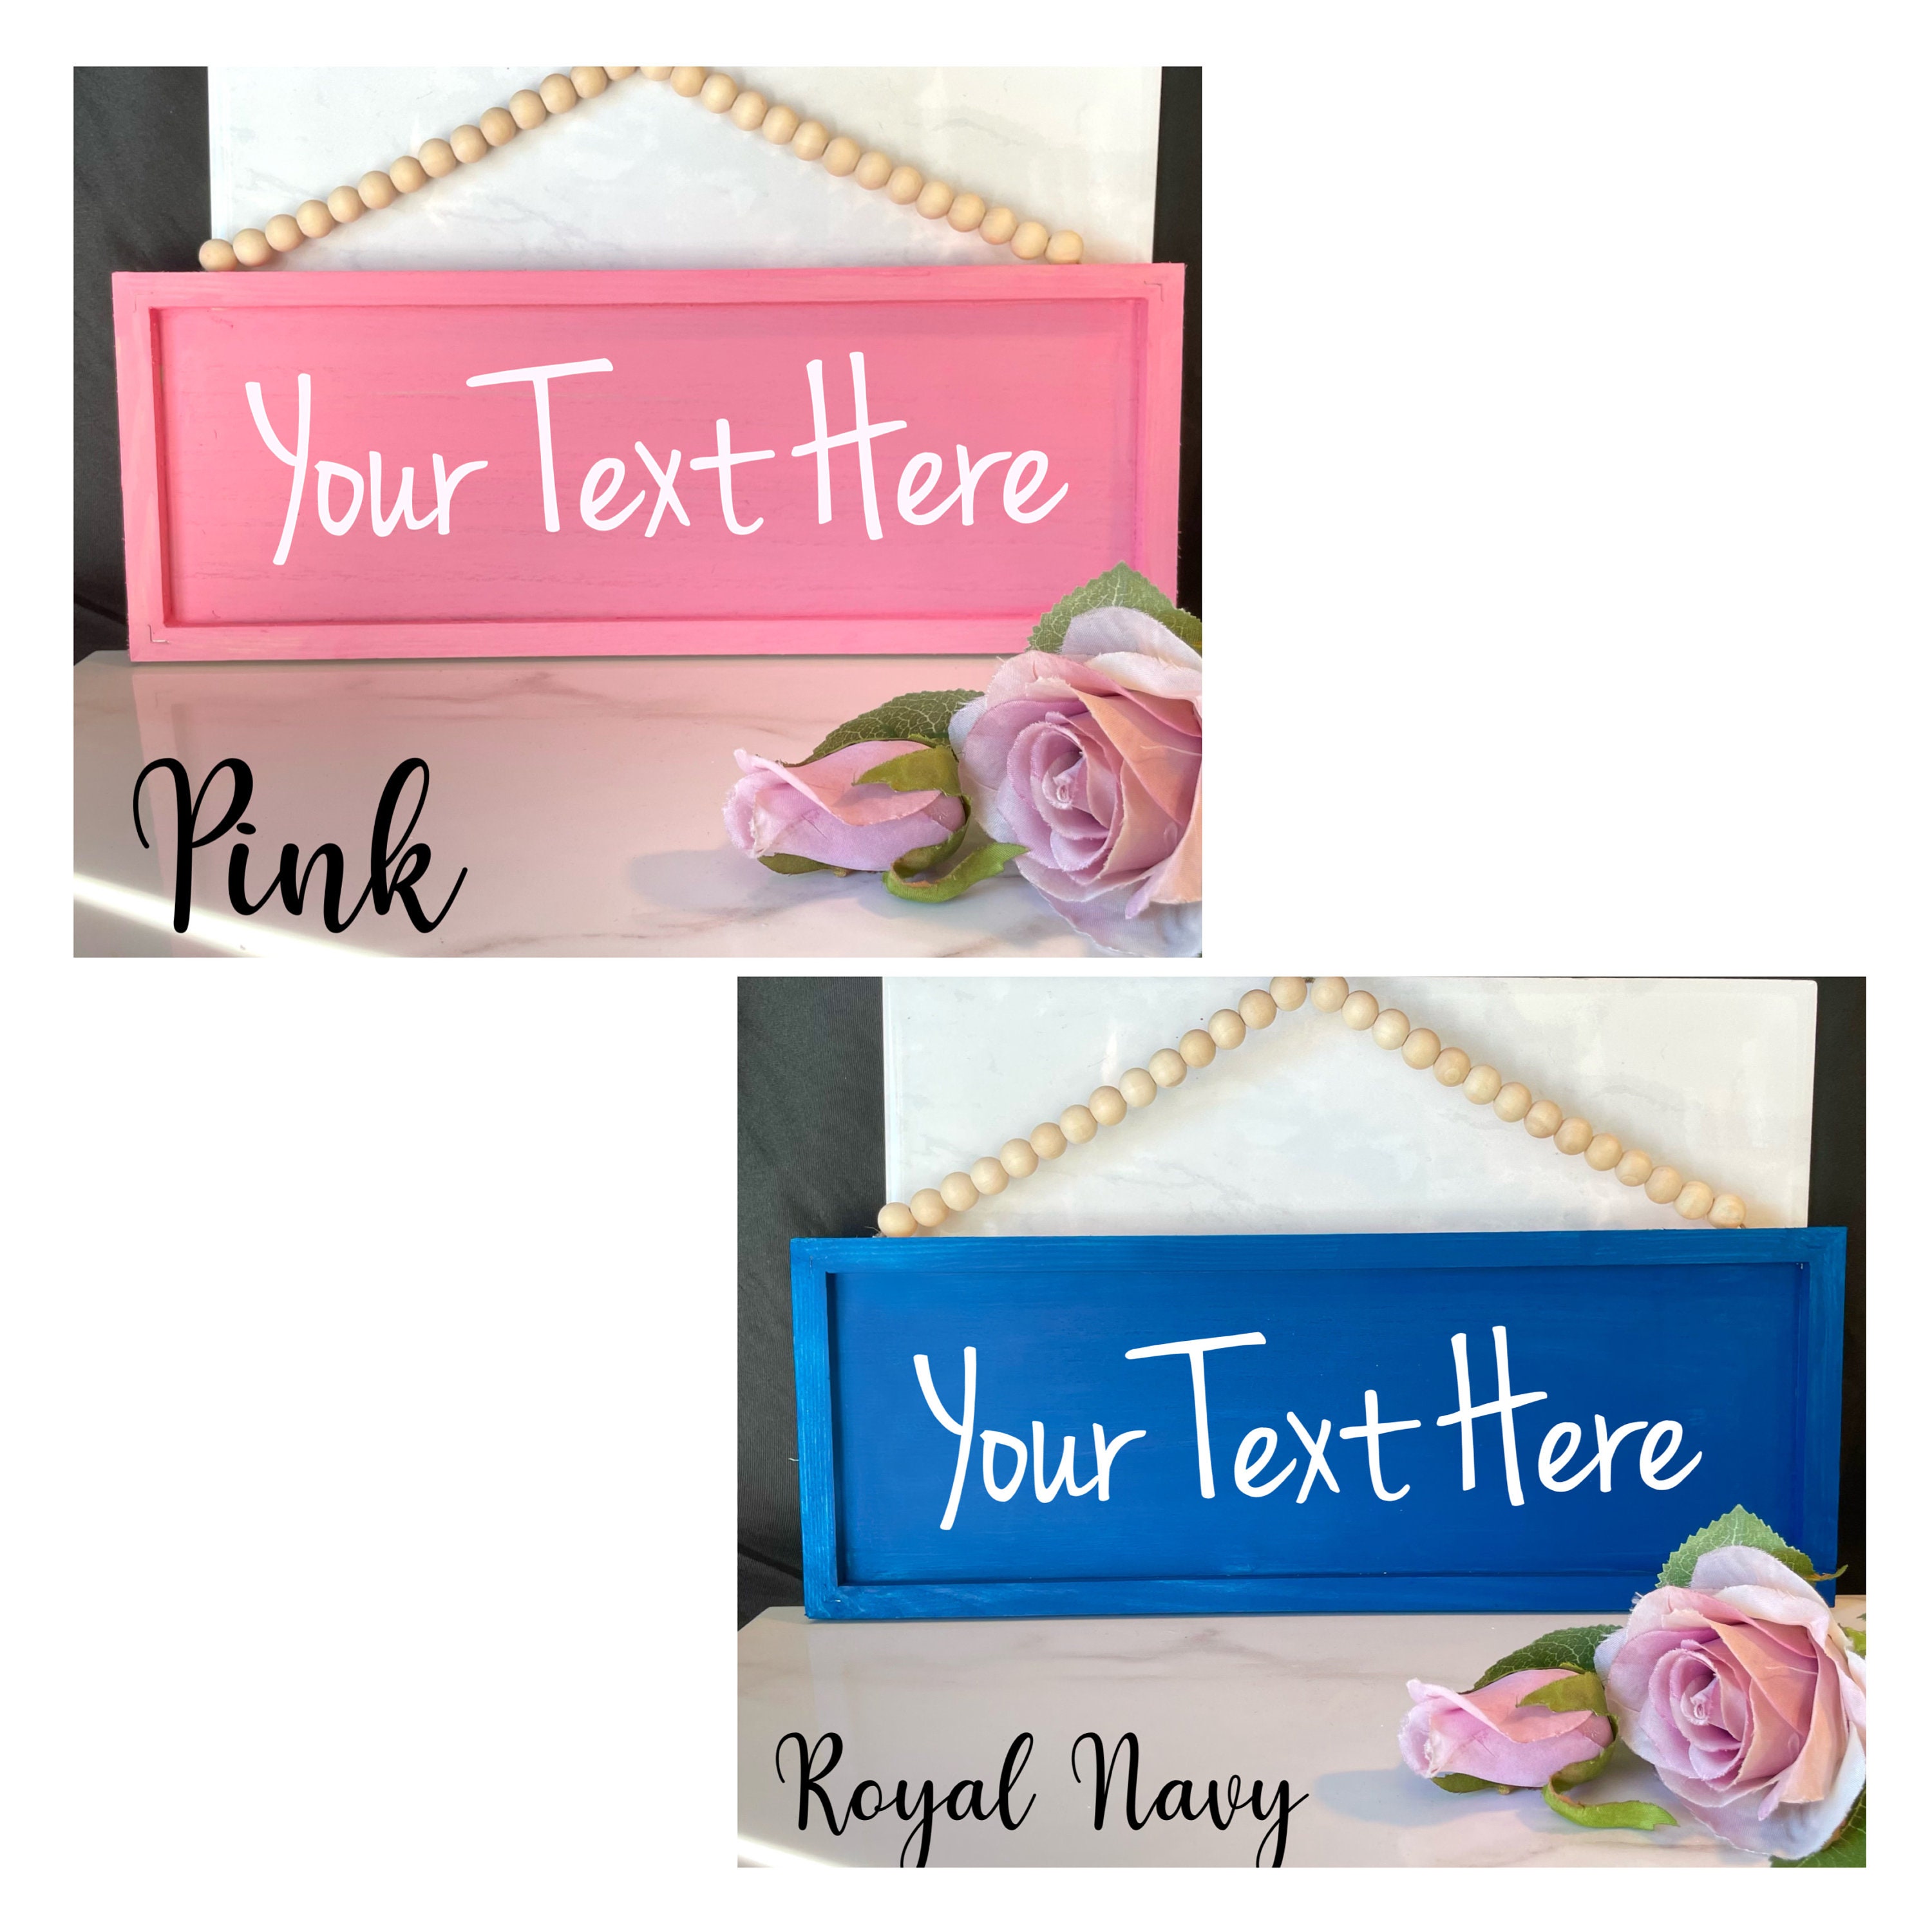 Discover Custom sign, reversible sign, personalized sign, door hanger wall decor hanging wall decor